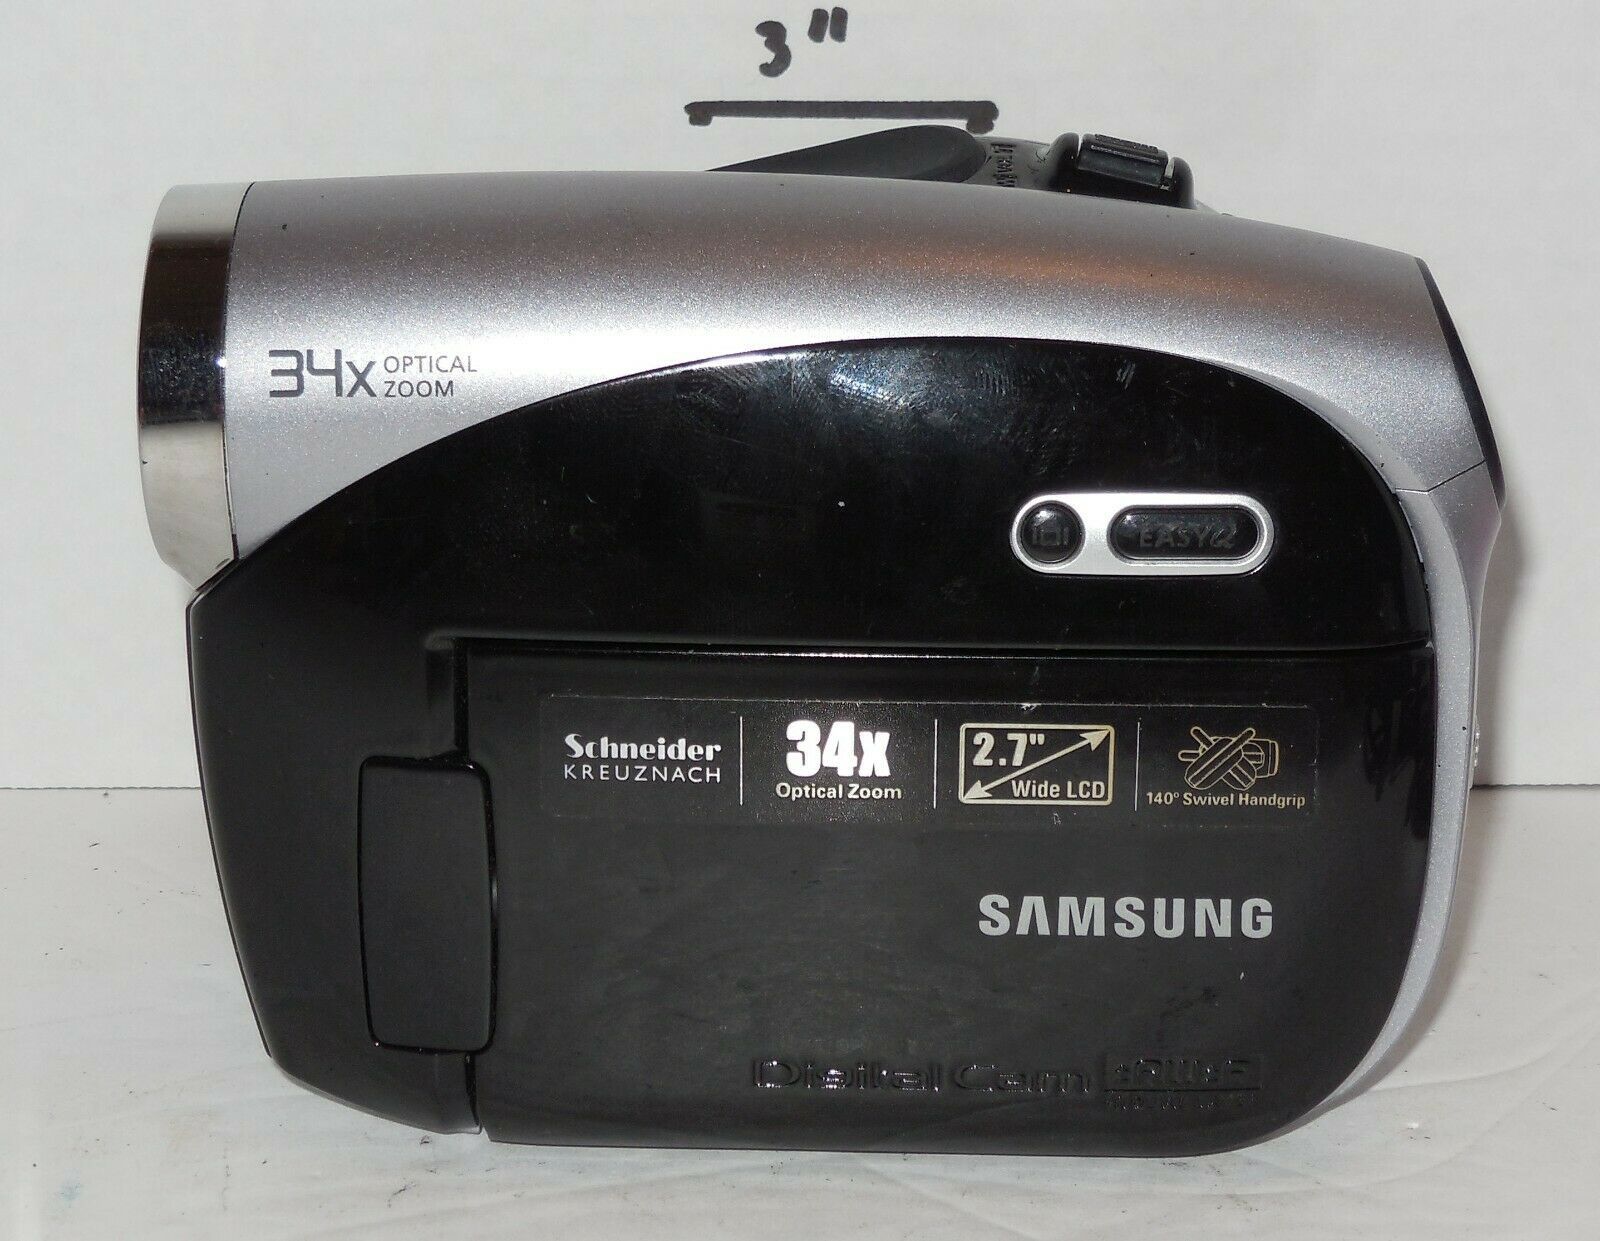 samsung sc-dx103 only record from memory card